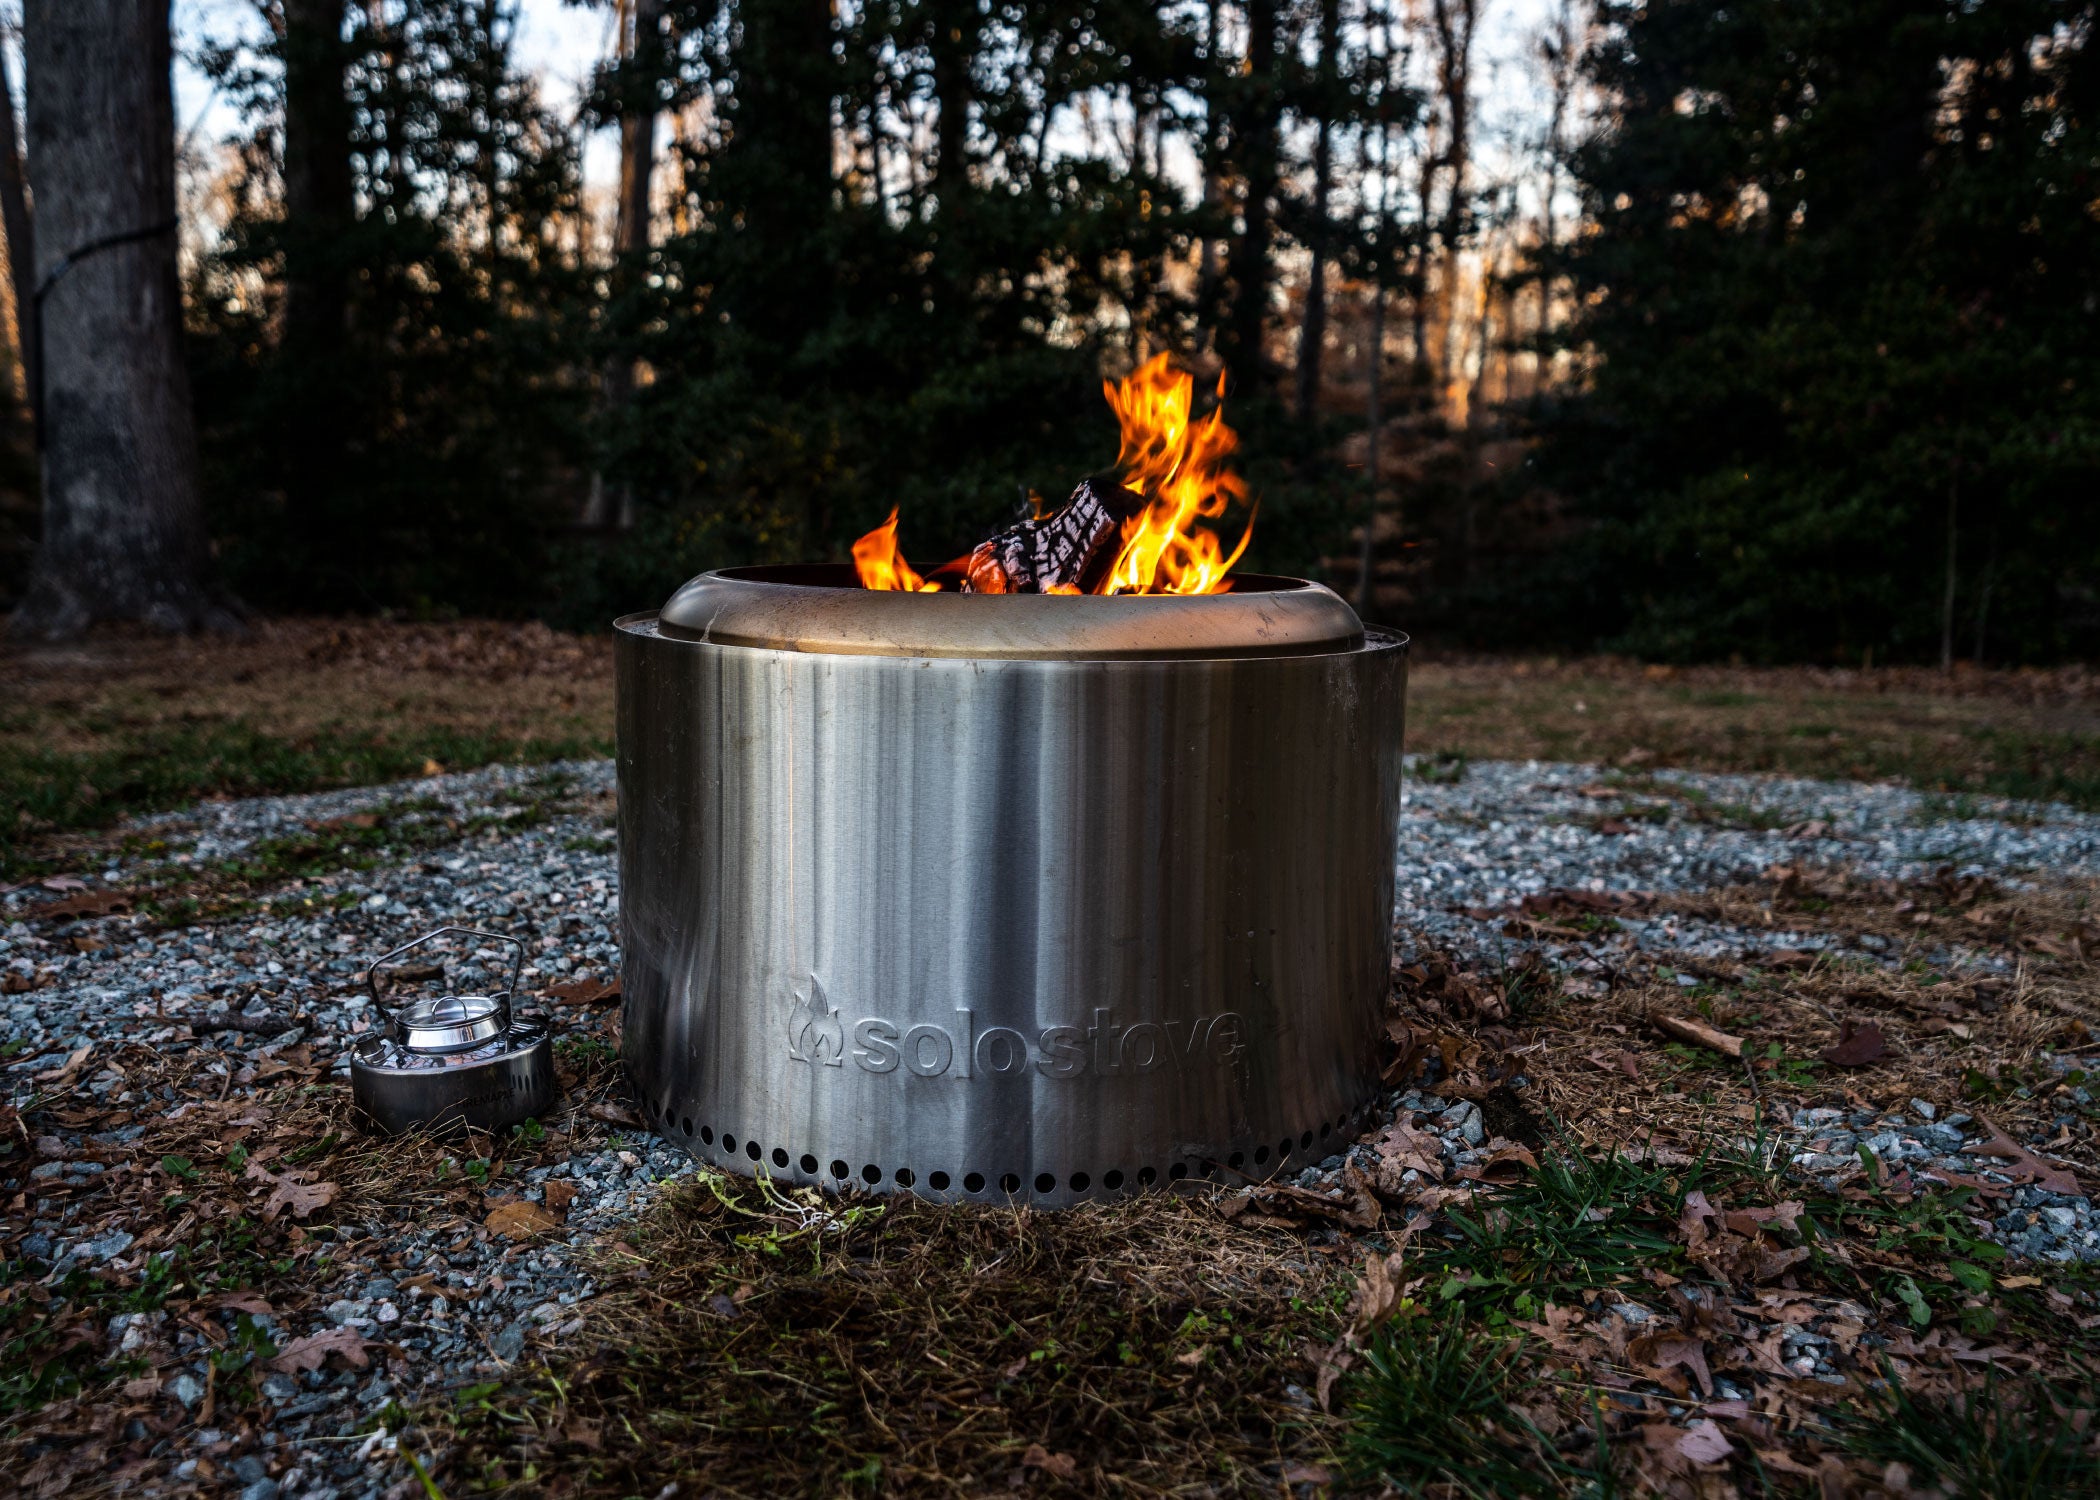 The best Solo Stove deals of Prime Day 2022